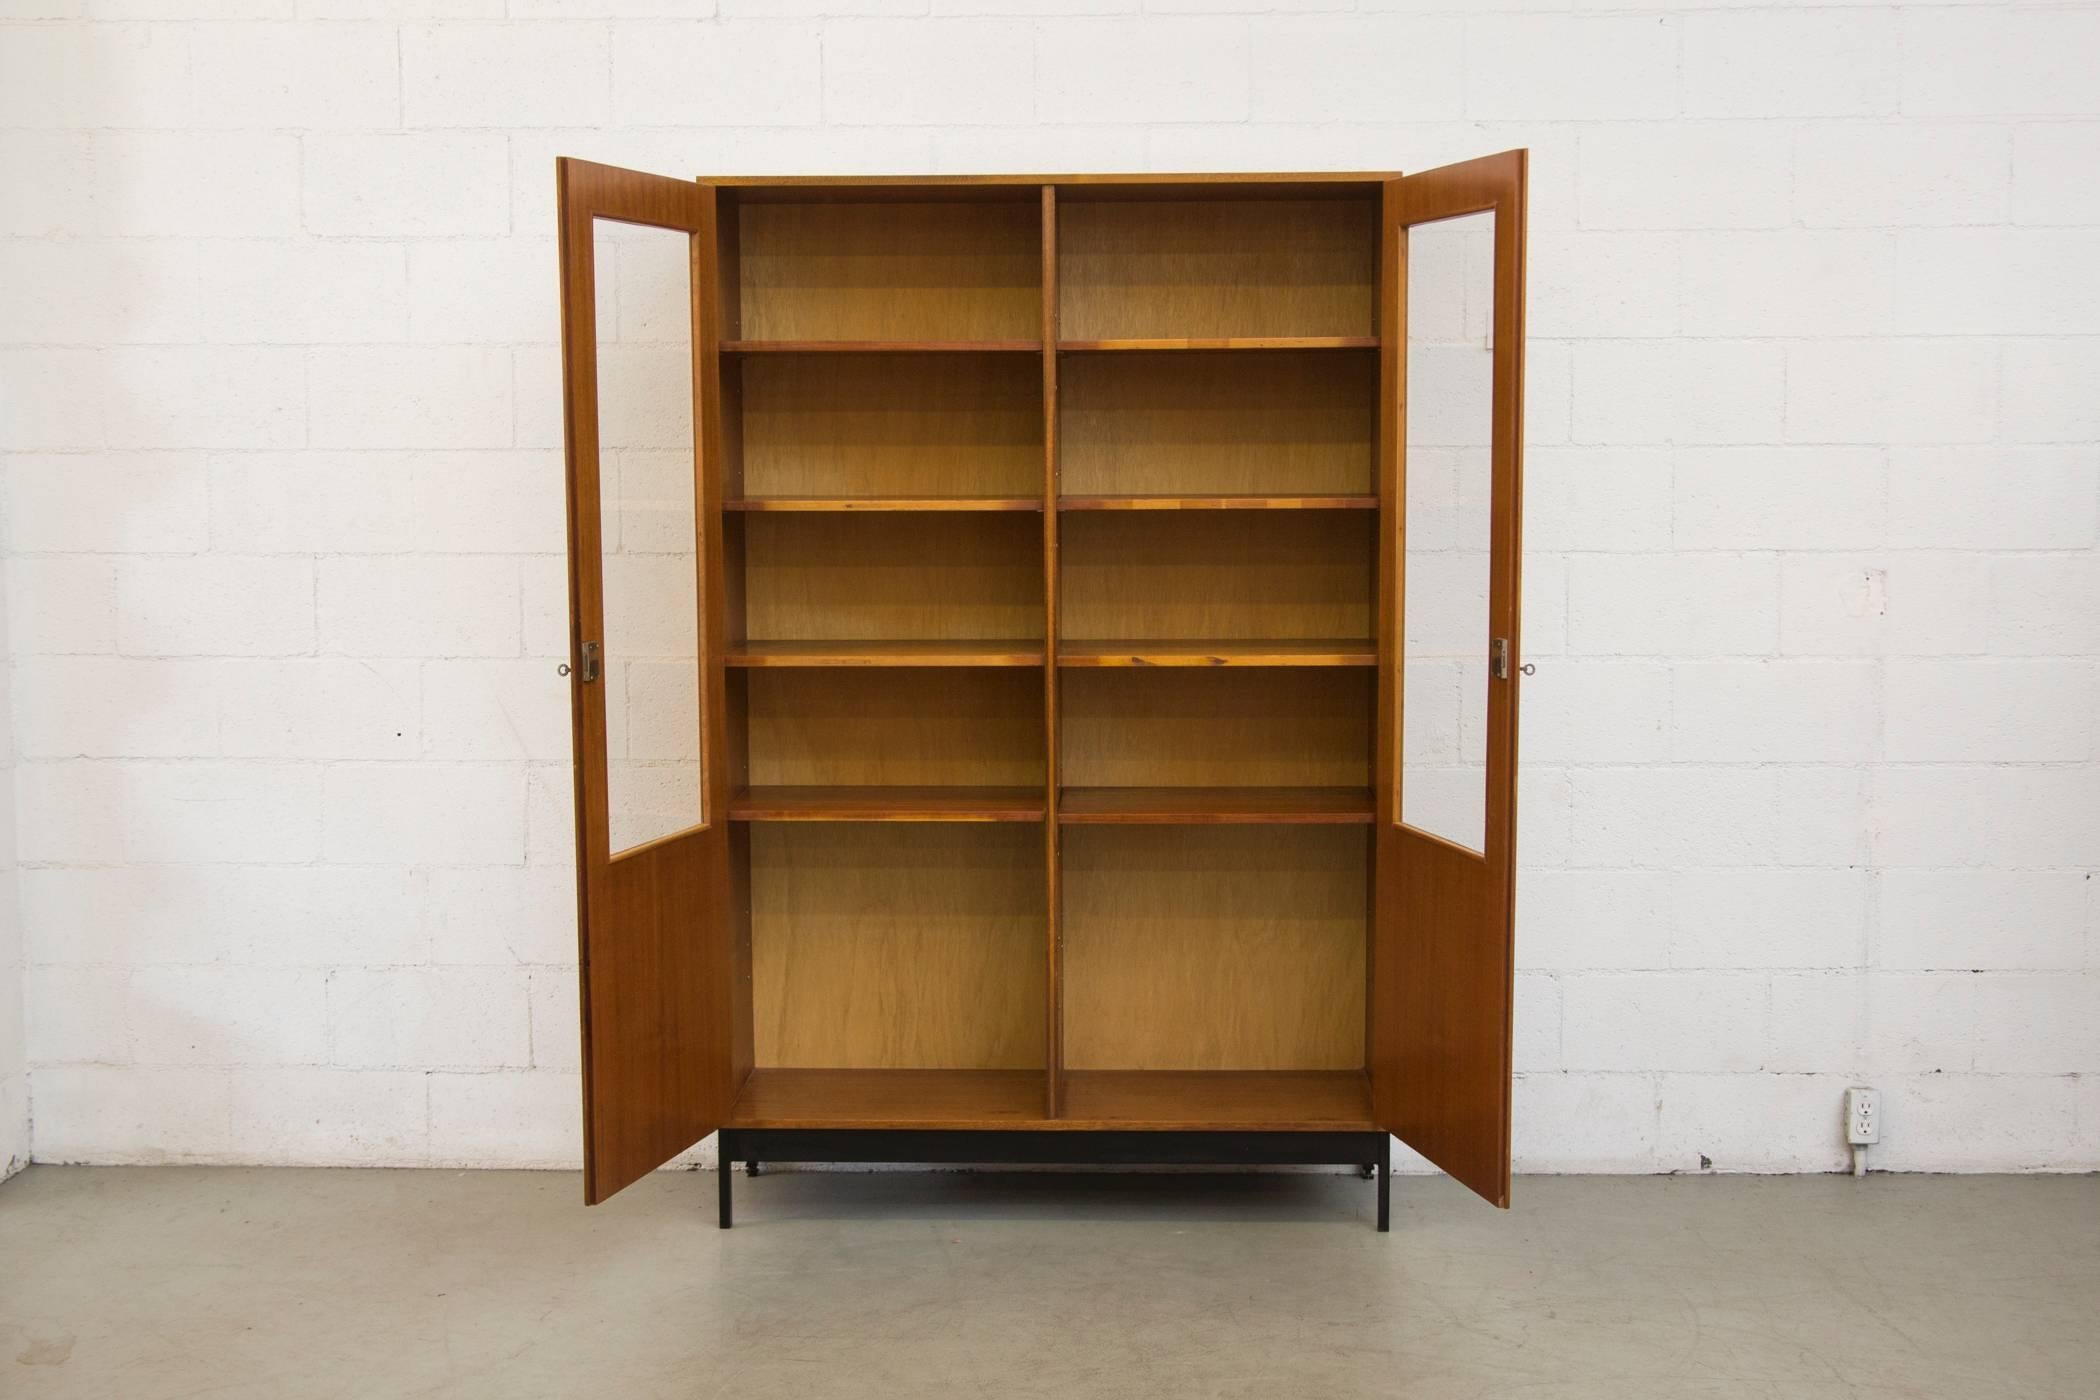 Amazing display cabinet, China cabinet, office book shelf! Bleached mahogany case with double glass doors, adjustable height shelves on a steel frame. Original condition with minimal wear consistent with its age and usage. Extra shelves available